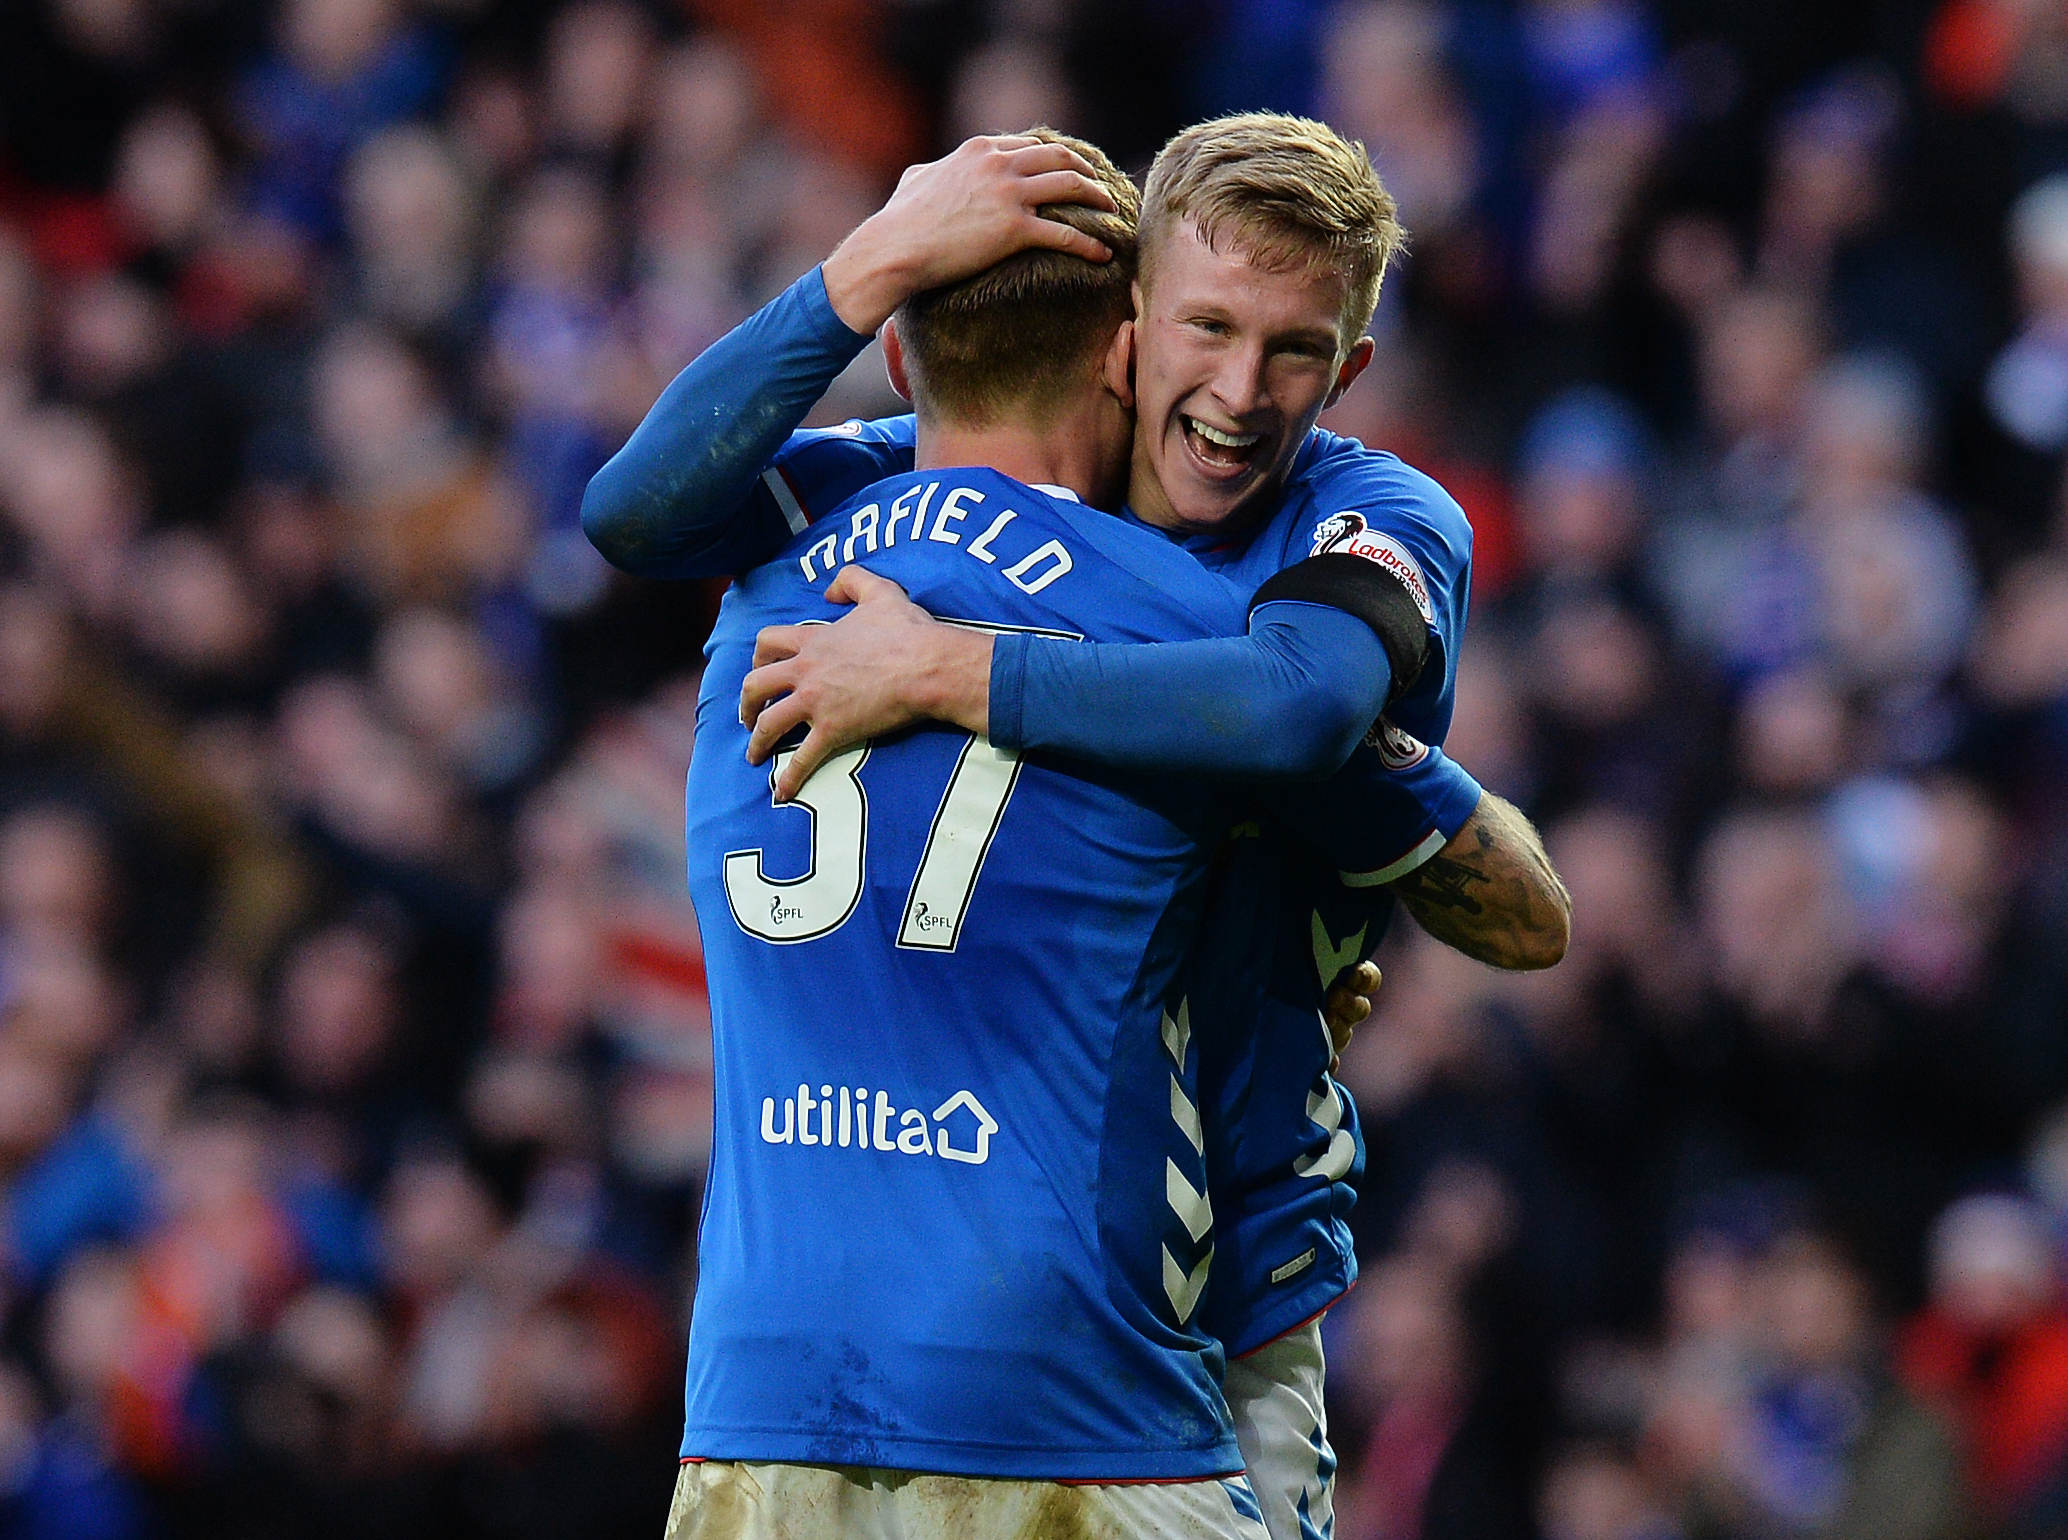 Featured image with ex-Ranger Ross McCrorie